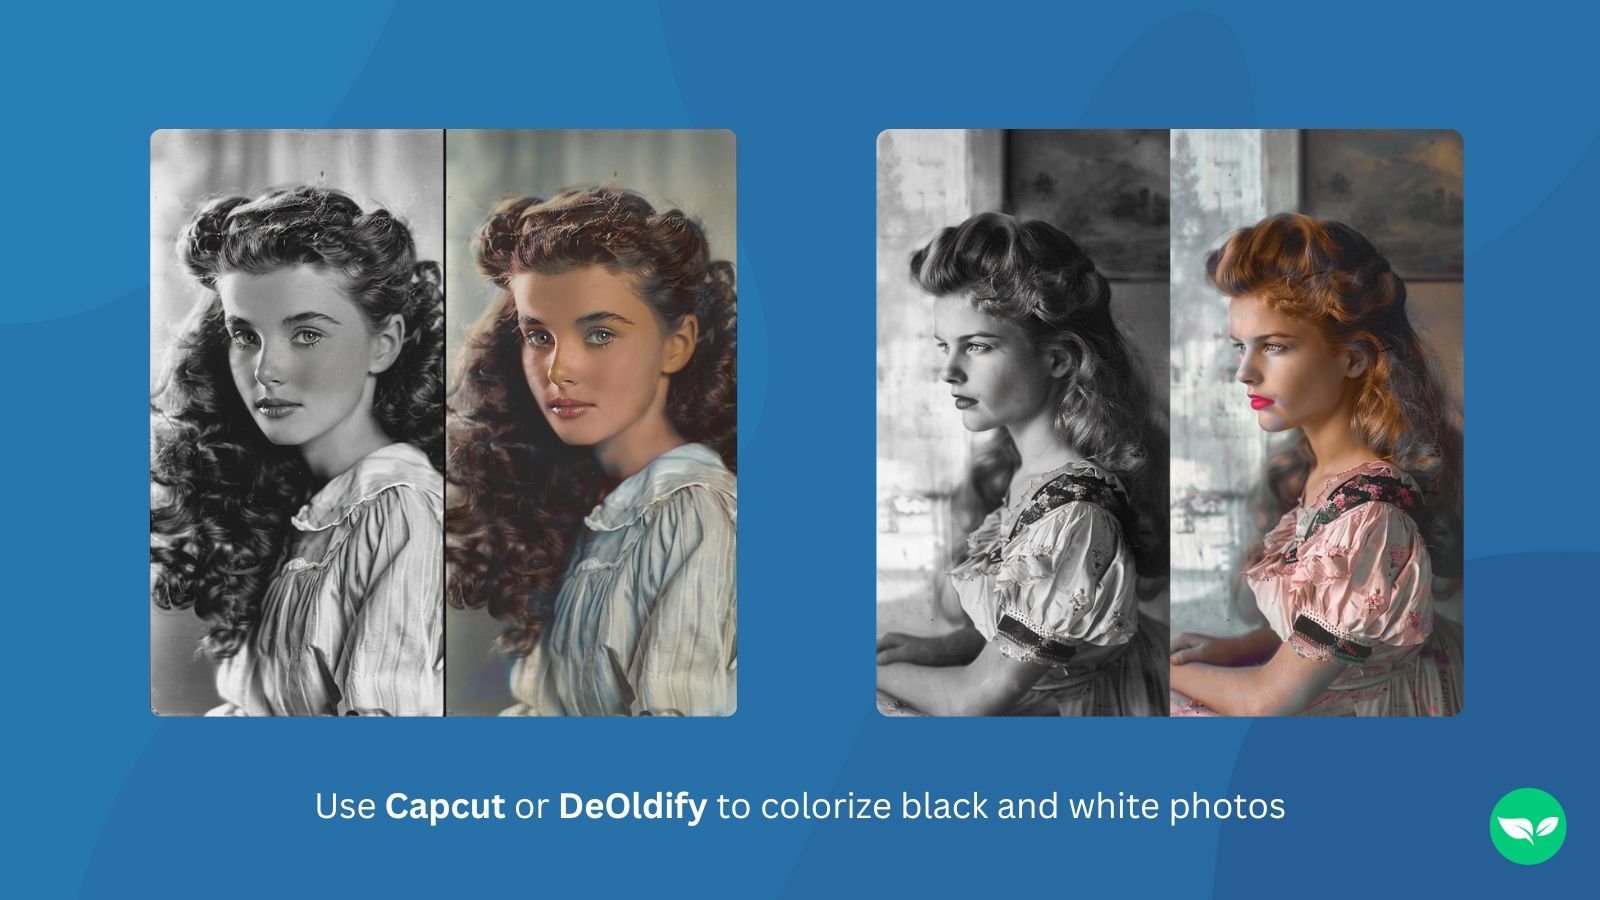 A screenshot showing two old black and white photos that have been colorized using AI.